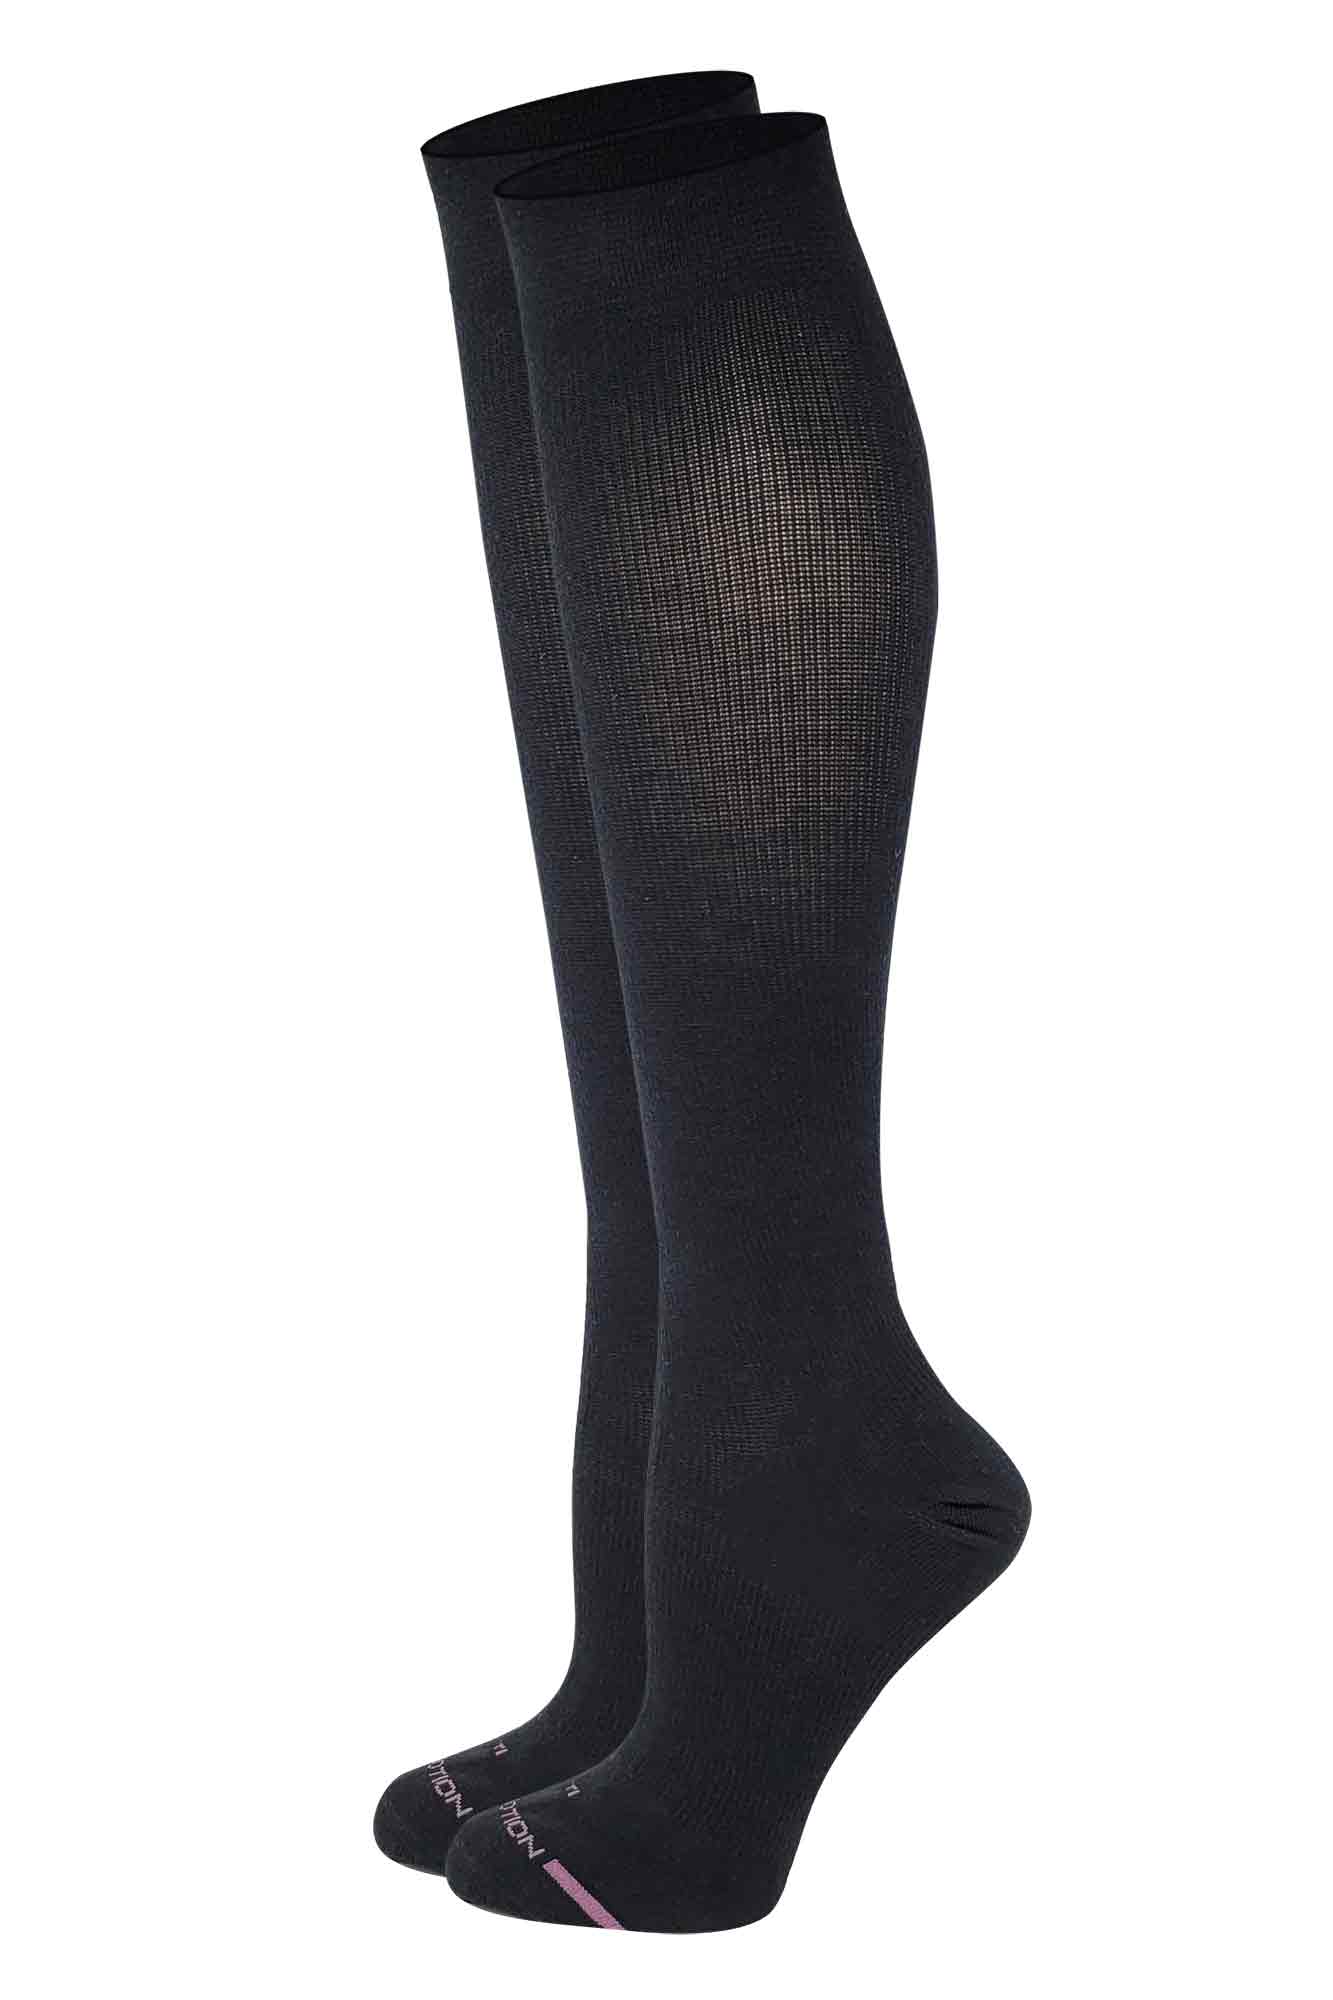 Knee-High Compression Socks| Solid Colors Women | 8-15 mmHg Dr Motion ( 1 Pair )